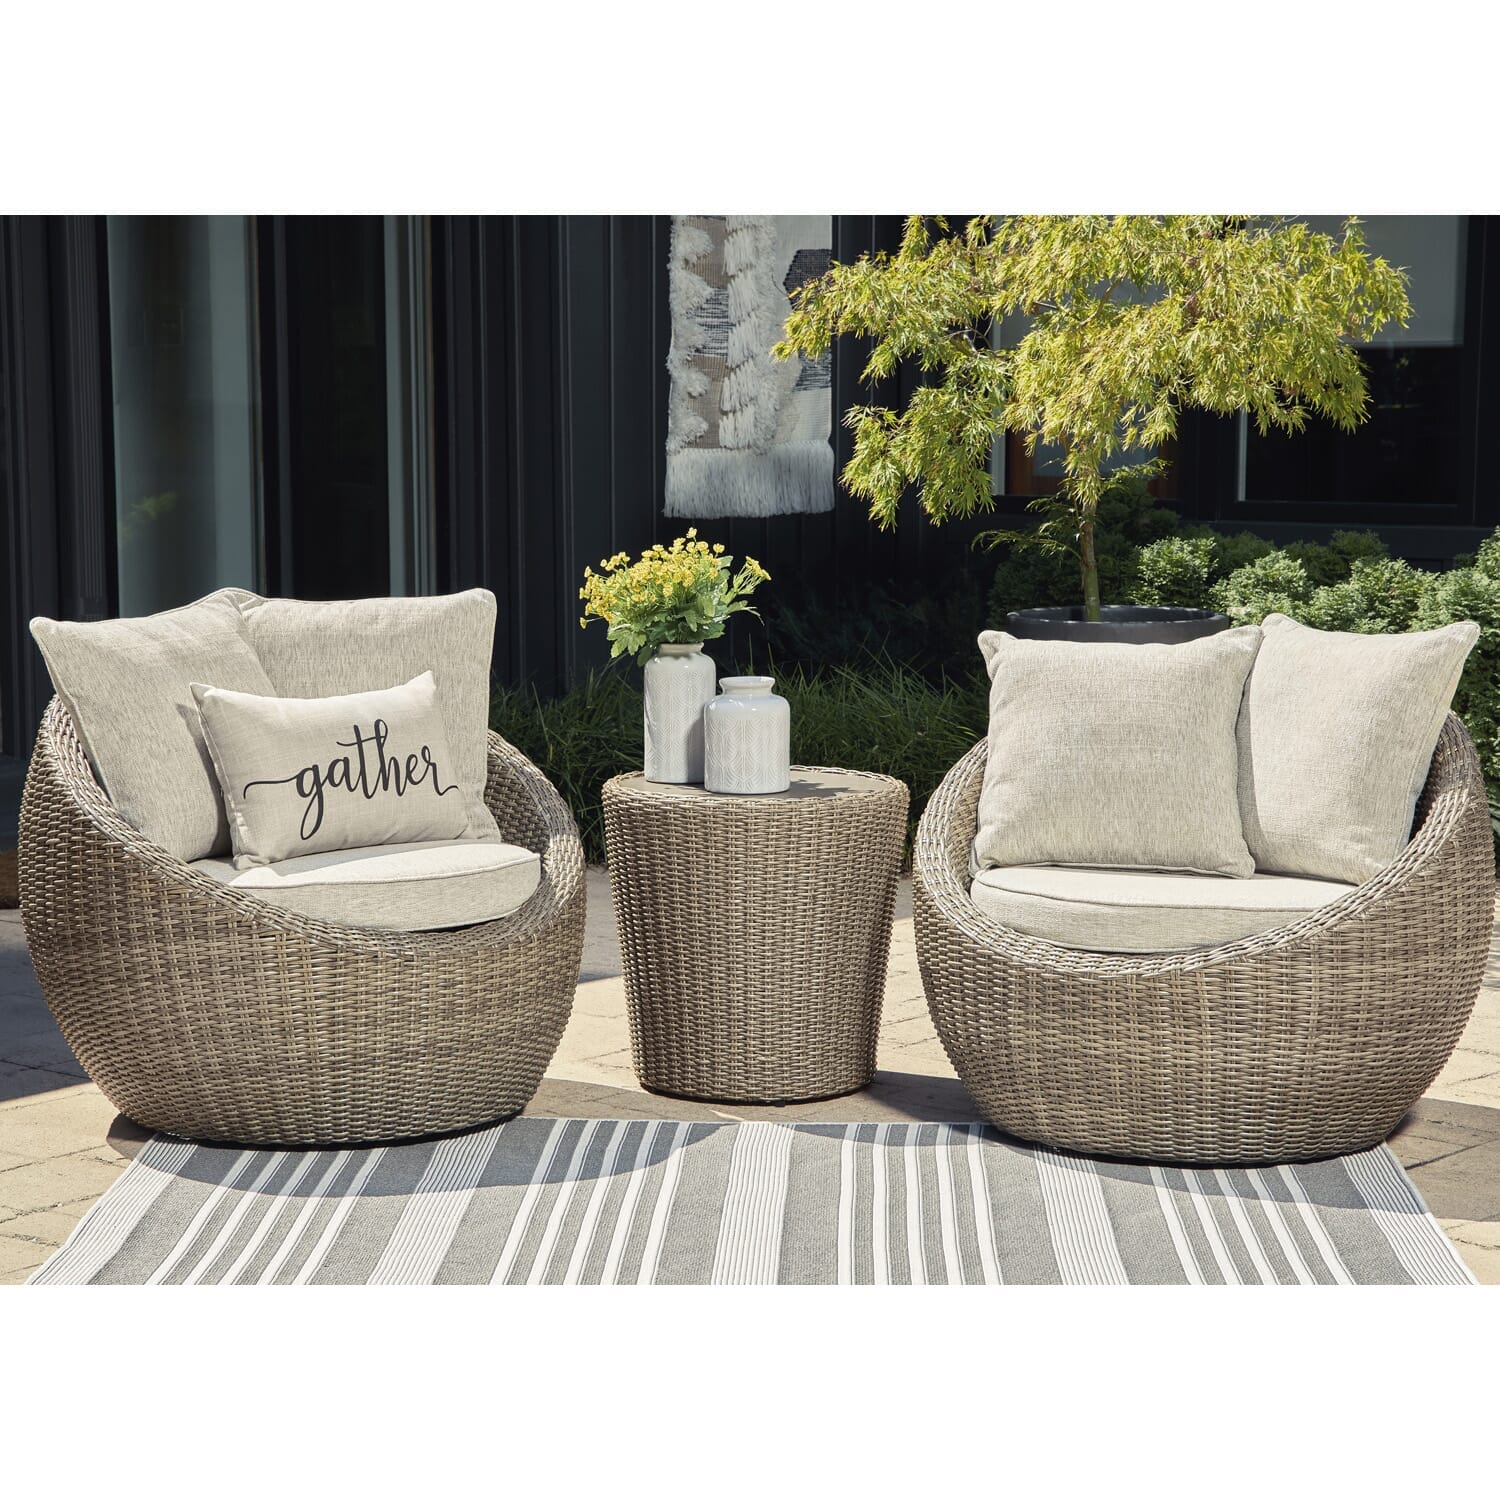 Dawn set of two swivel chairs with resin wicker and upholstered cushions, finished with matching toss pillows and the Dawn End Table with flowers and a vase on top.